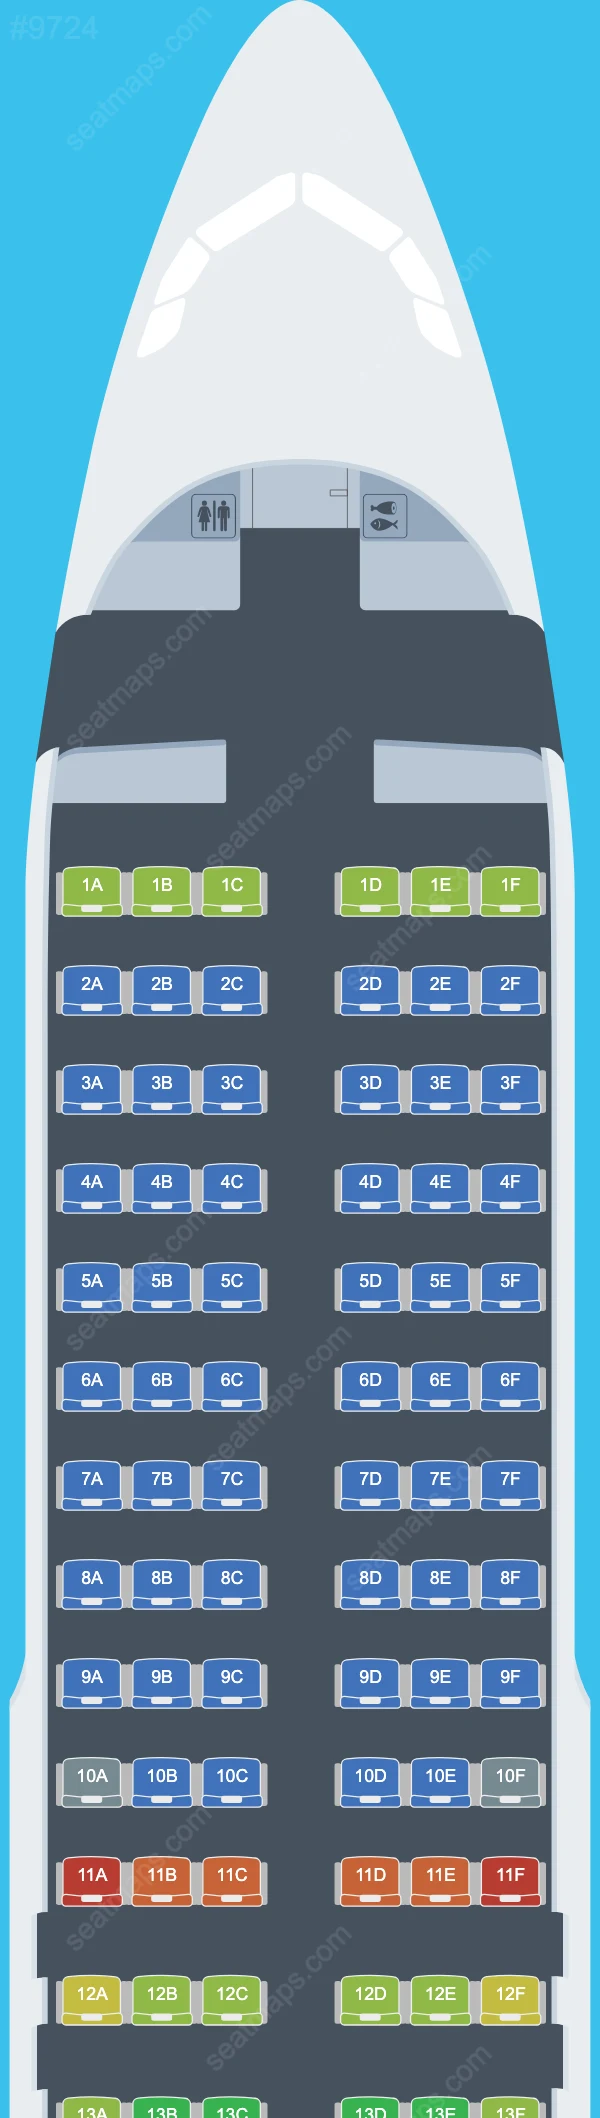 Vietnam Airlines Airbus A320 Seat Maps A320-200 V.1